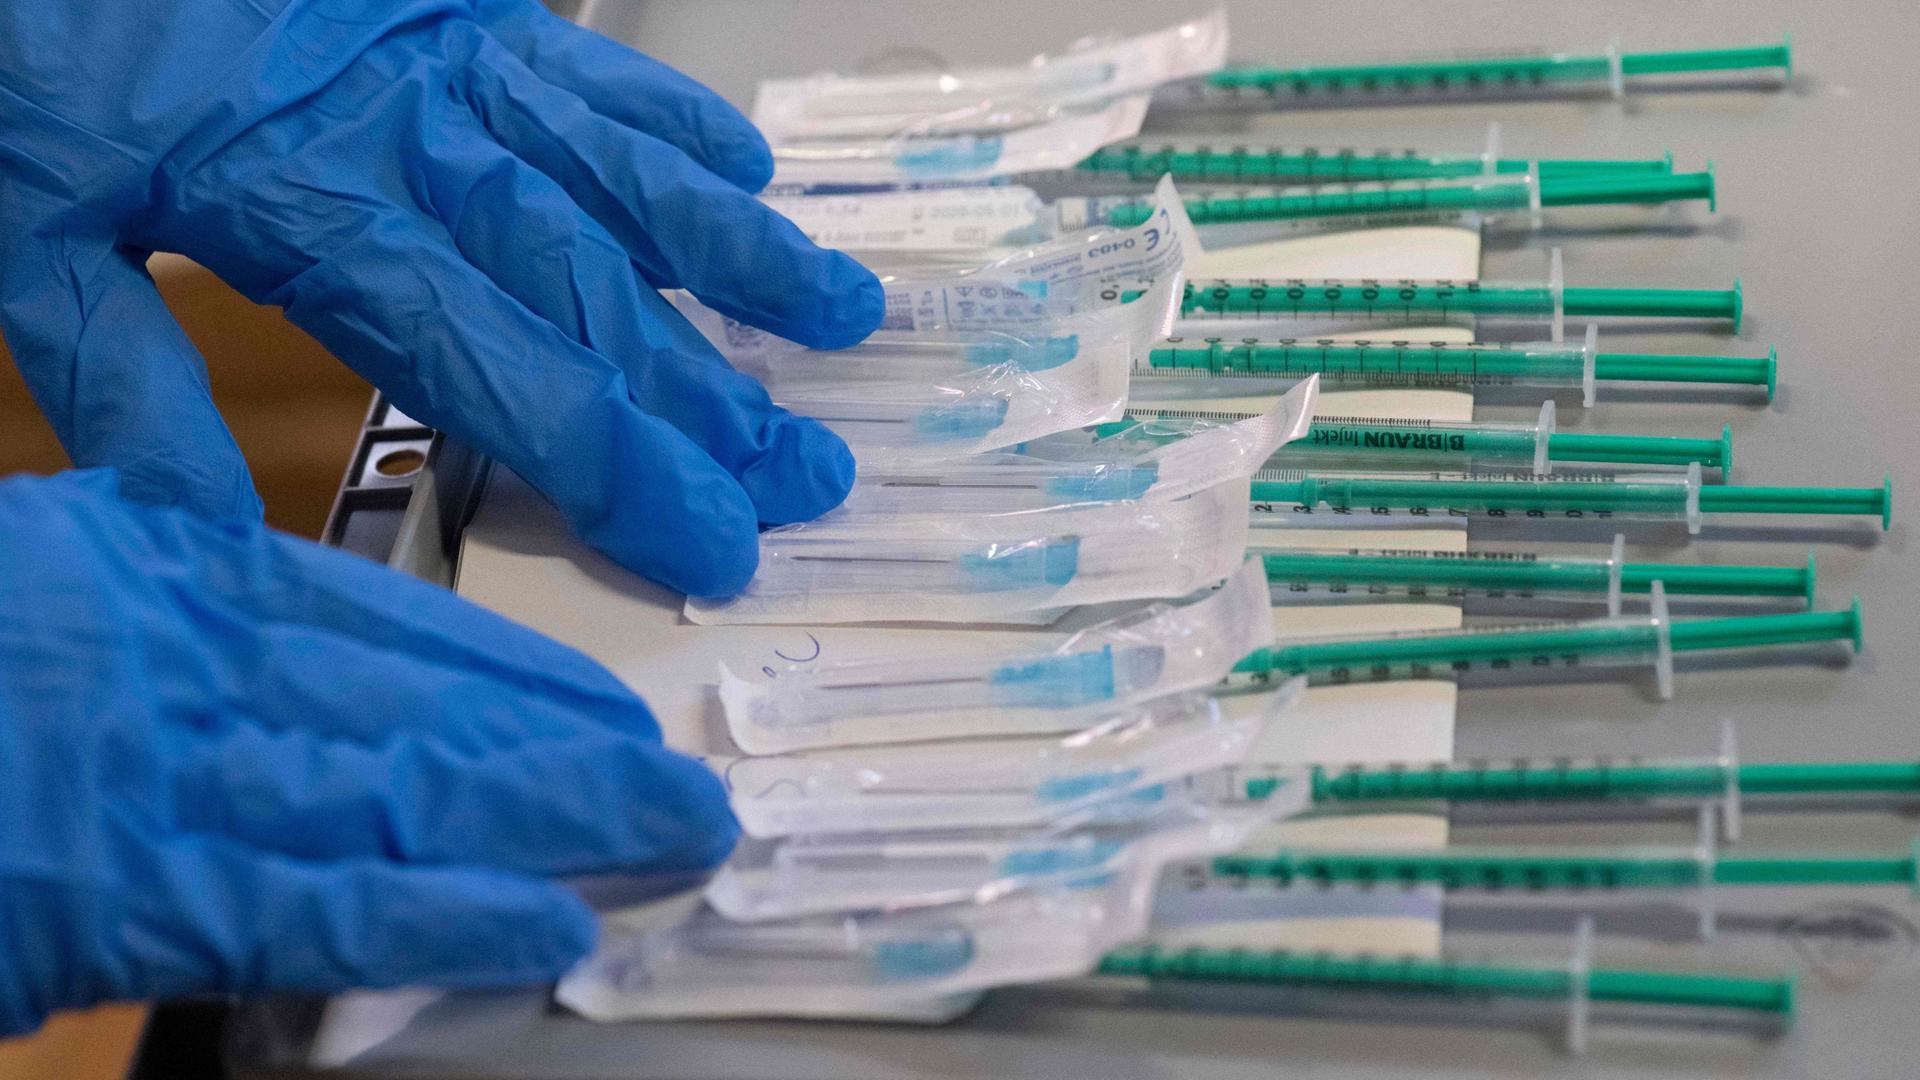 Syringes filled with the BioNtech-Pfizer Covid-19 coronavirus vaccine are being prepared in a mobile vaccination center in Hemmingen, Germany, on Tuesday